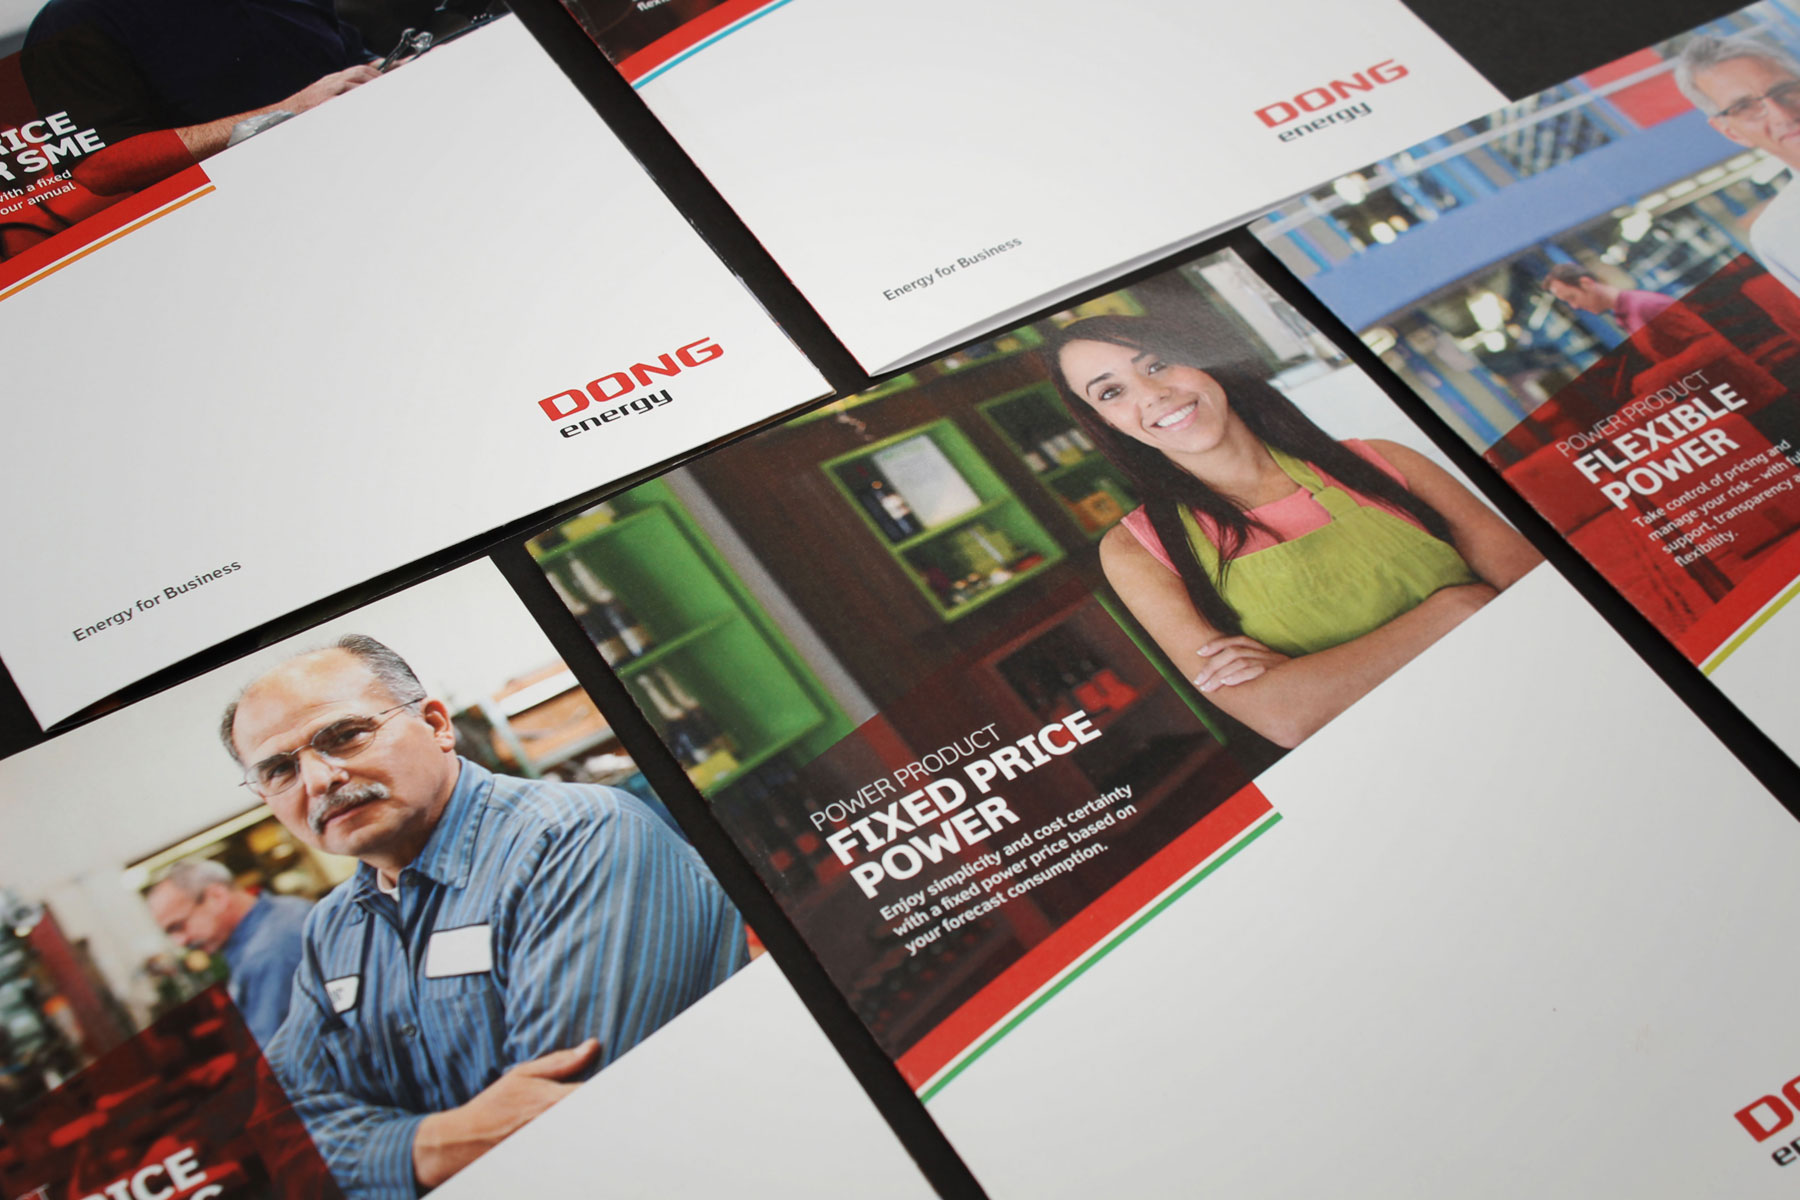 A number of printed materials were produced for the sales team. The look and feel aligns seamlessly with the new website. Strong use of white space enhances the graphic devices and gives DONG Energy for Business a clean, contemporary look and feel.